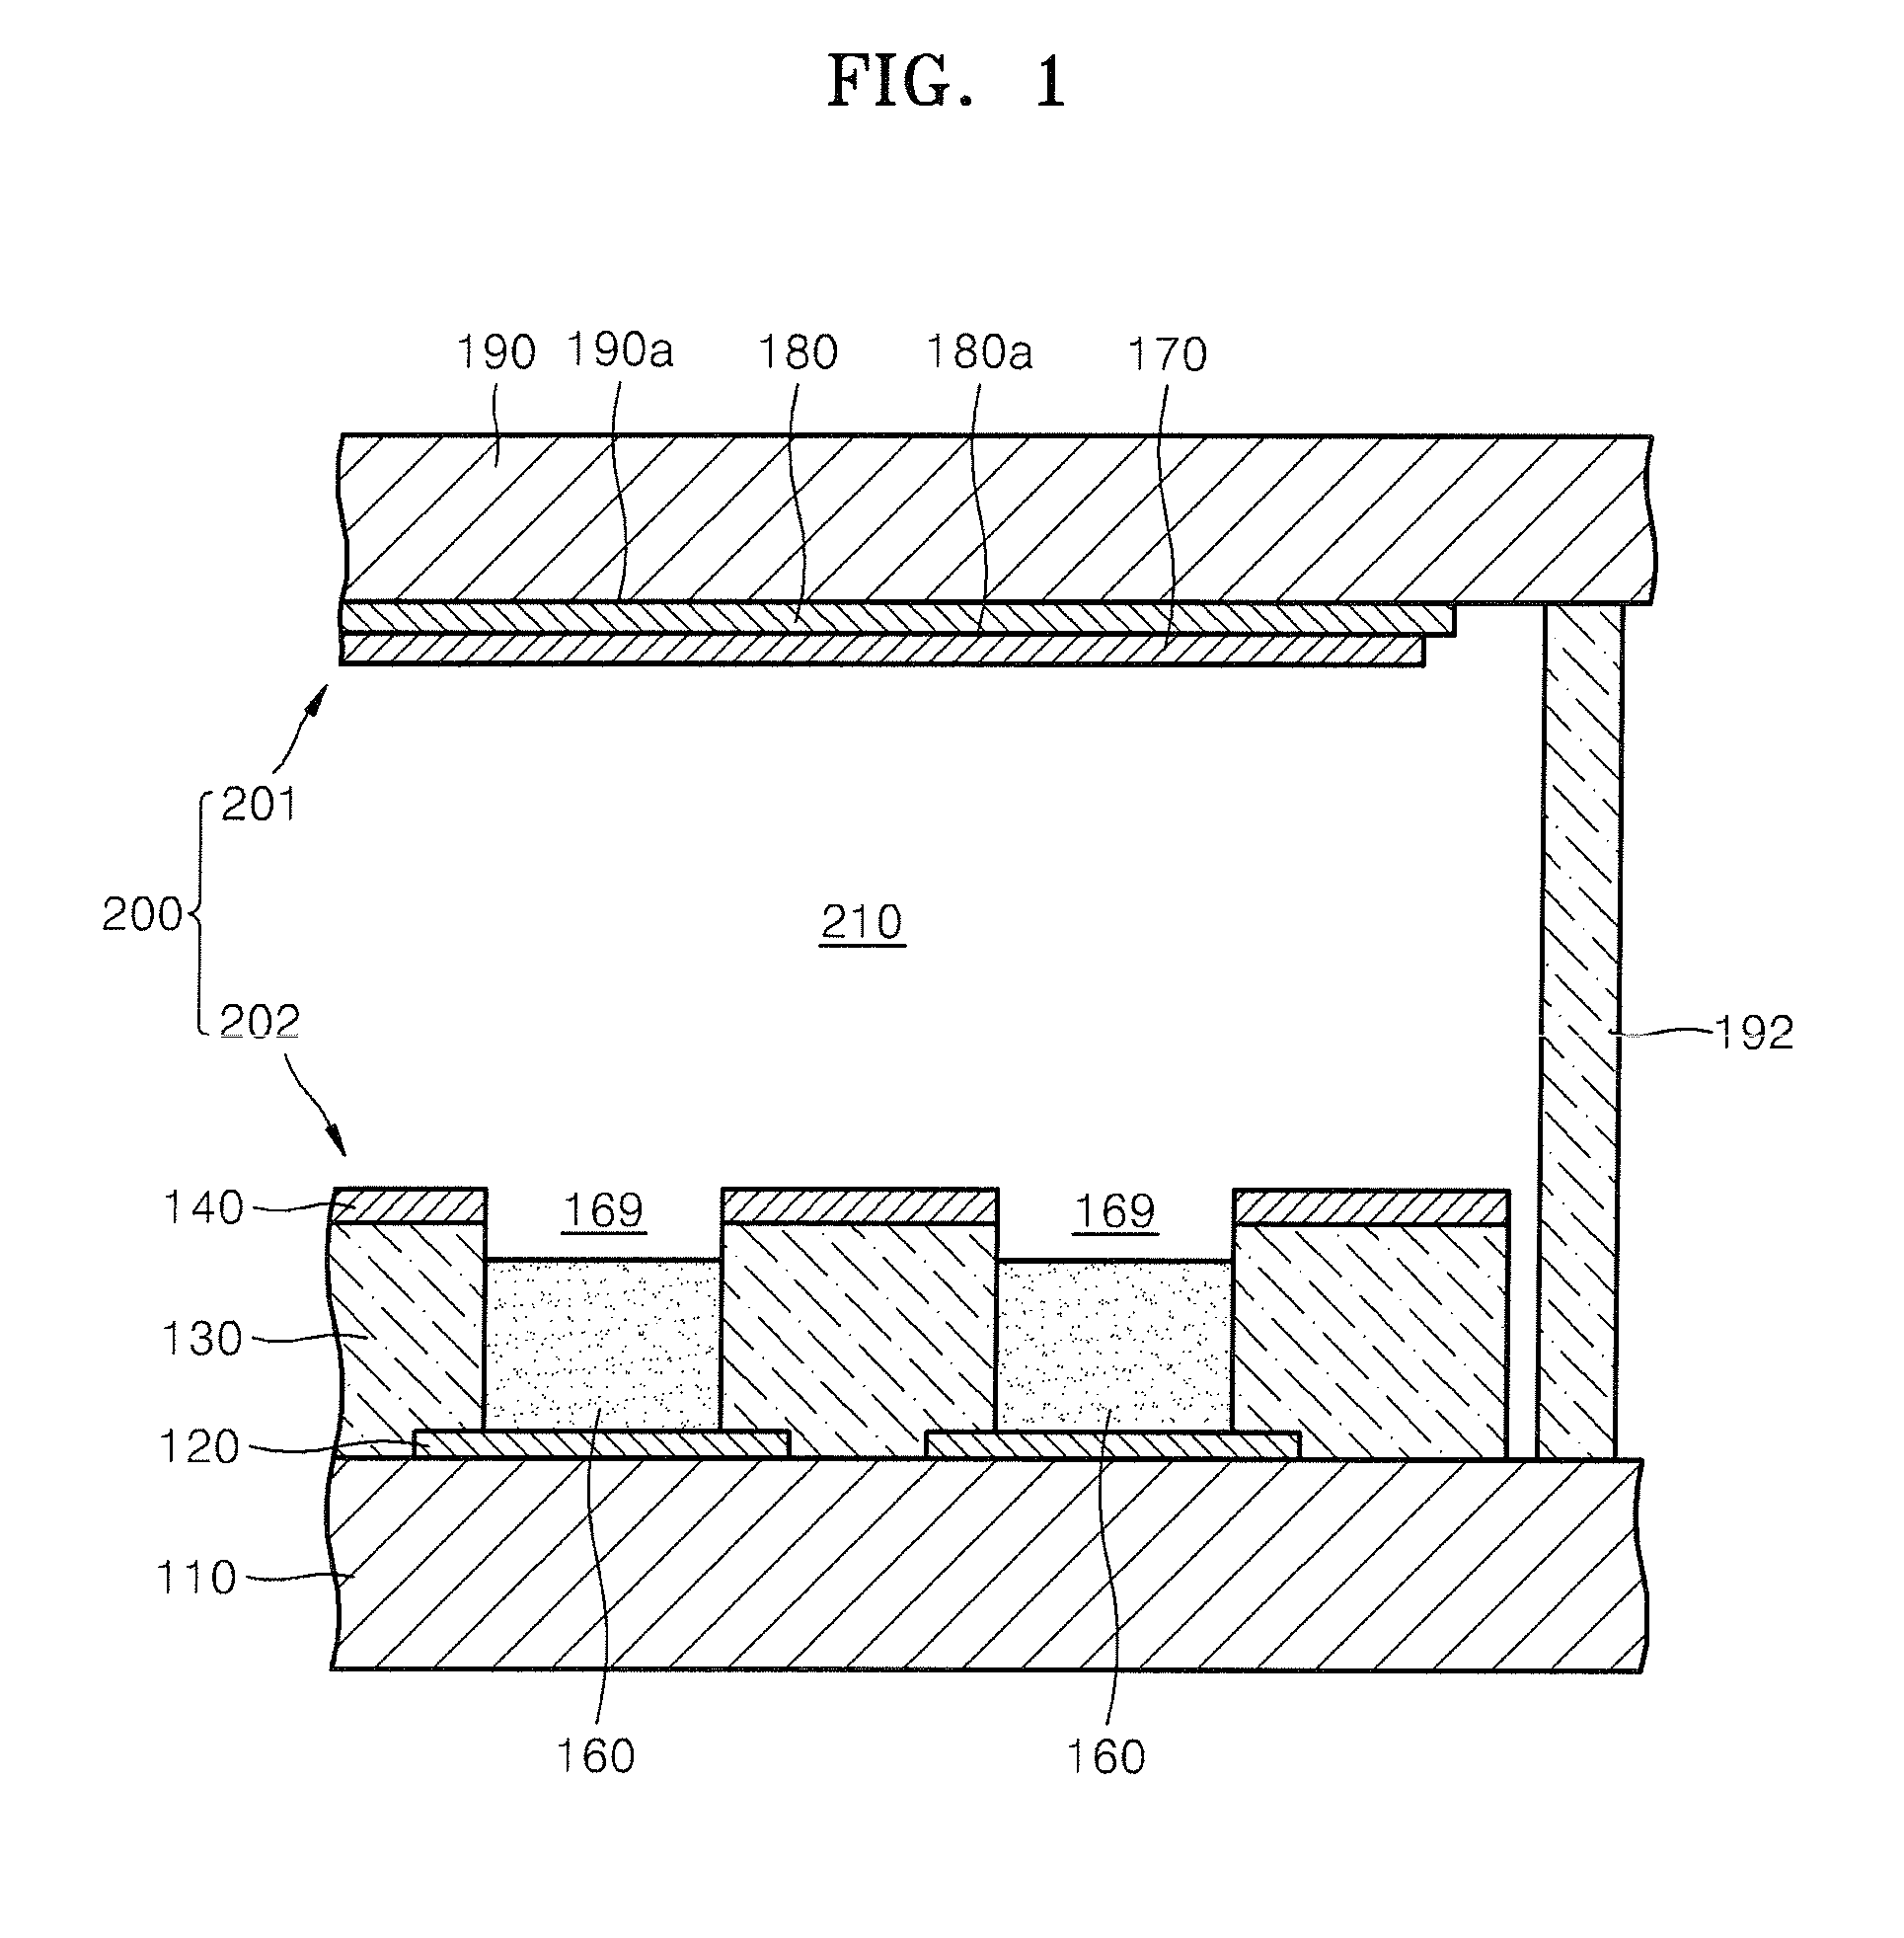 Composition for preparing emitter, method of preparing the emitter using the composition, emitter prepared using the method and electron emission device including the emitter